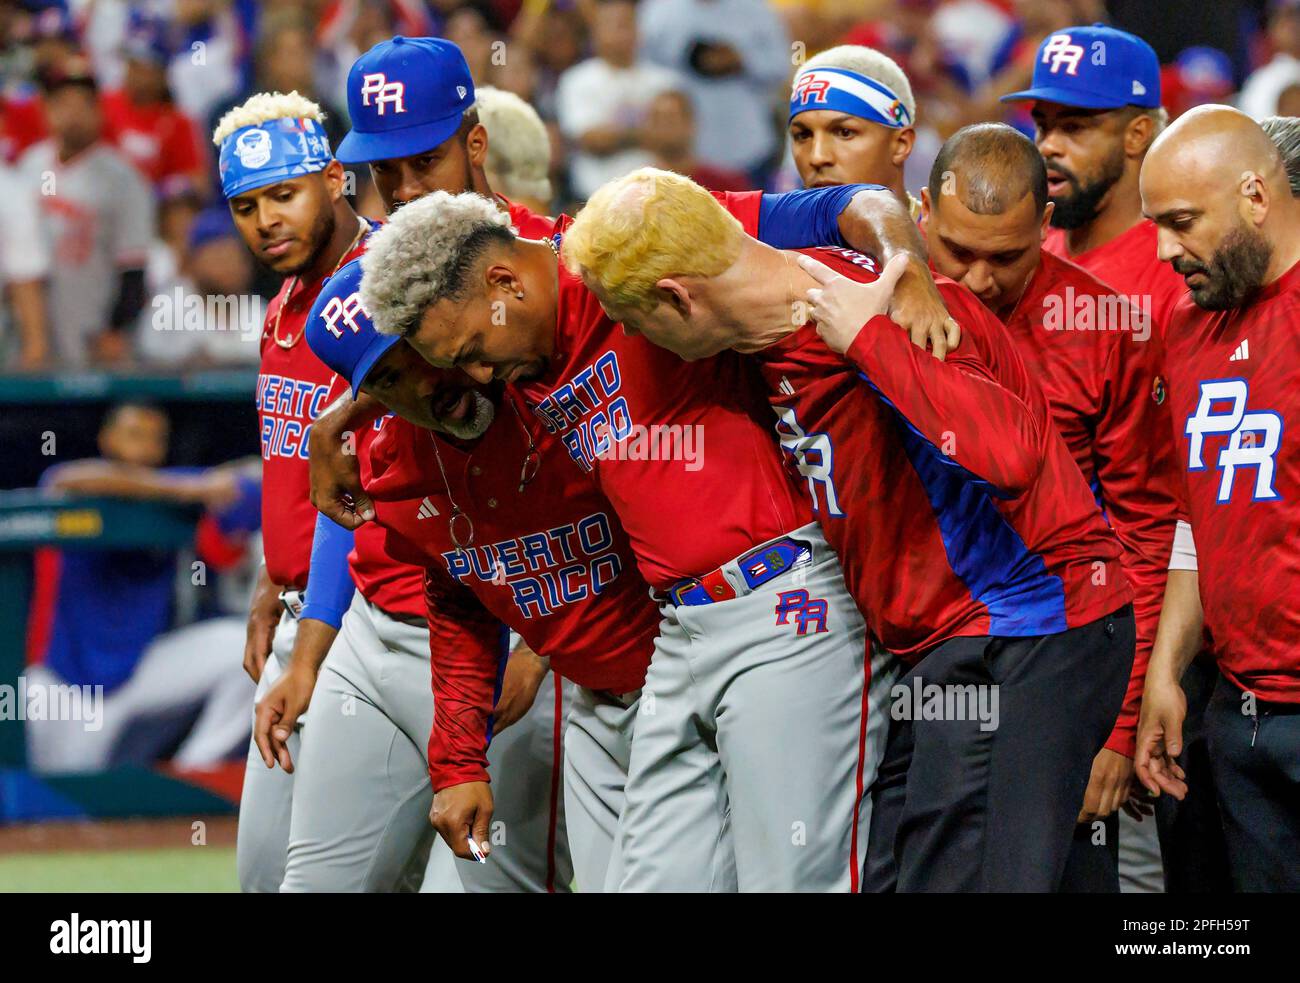 Puerto Rico pitcher Edwin Diaz (39) is being helped by team pitching coach  Ricky Bones and medical staff after the the Pool D game against Dominican  Republic at the World Baseball Classic